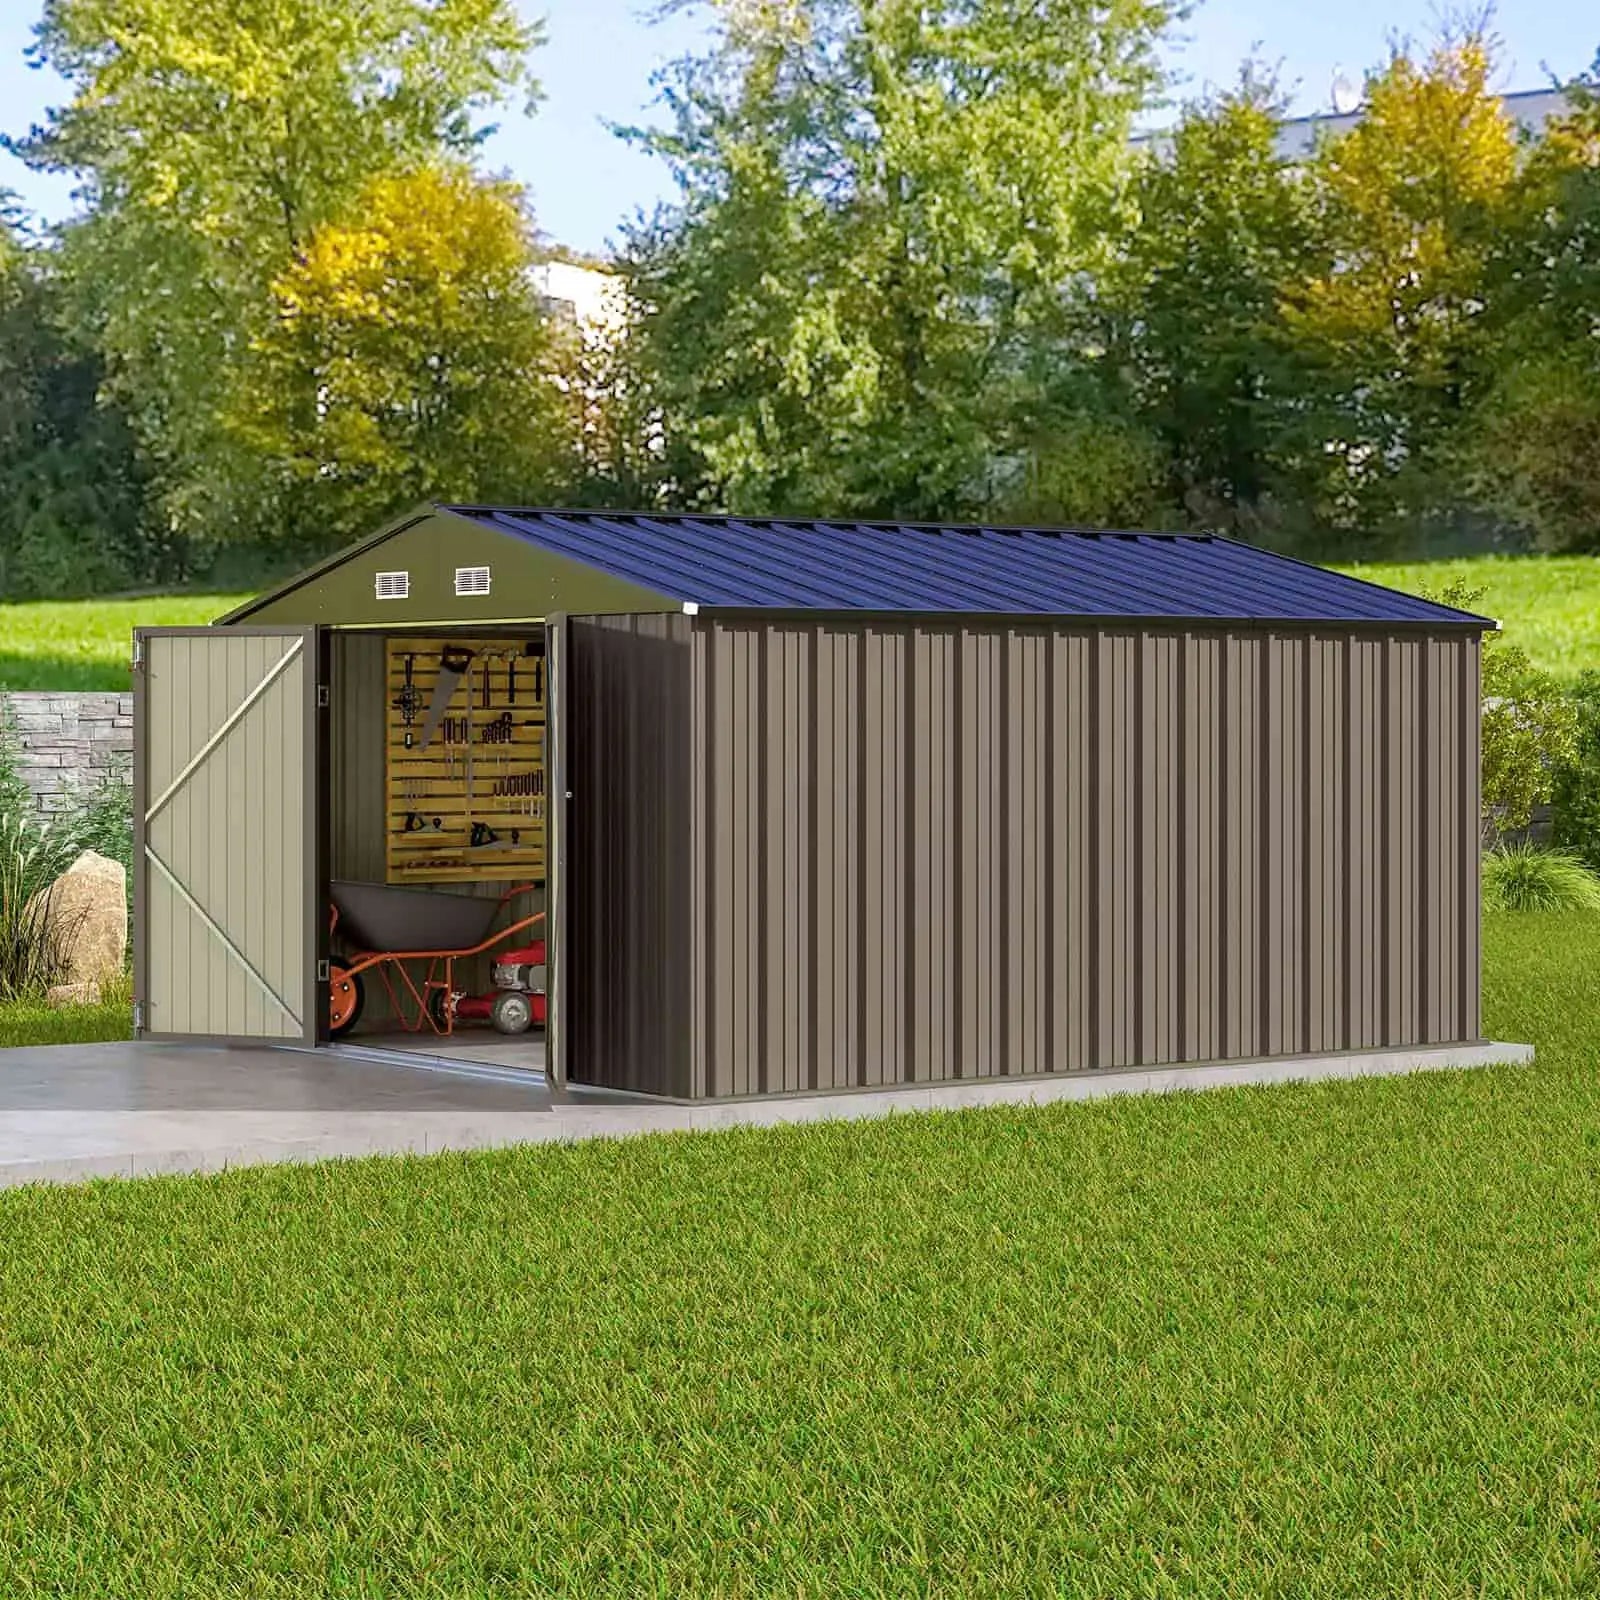 Patiowell 10x12 Metal Shed Pro With Peak Roof